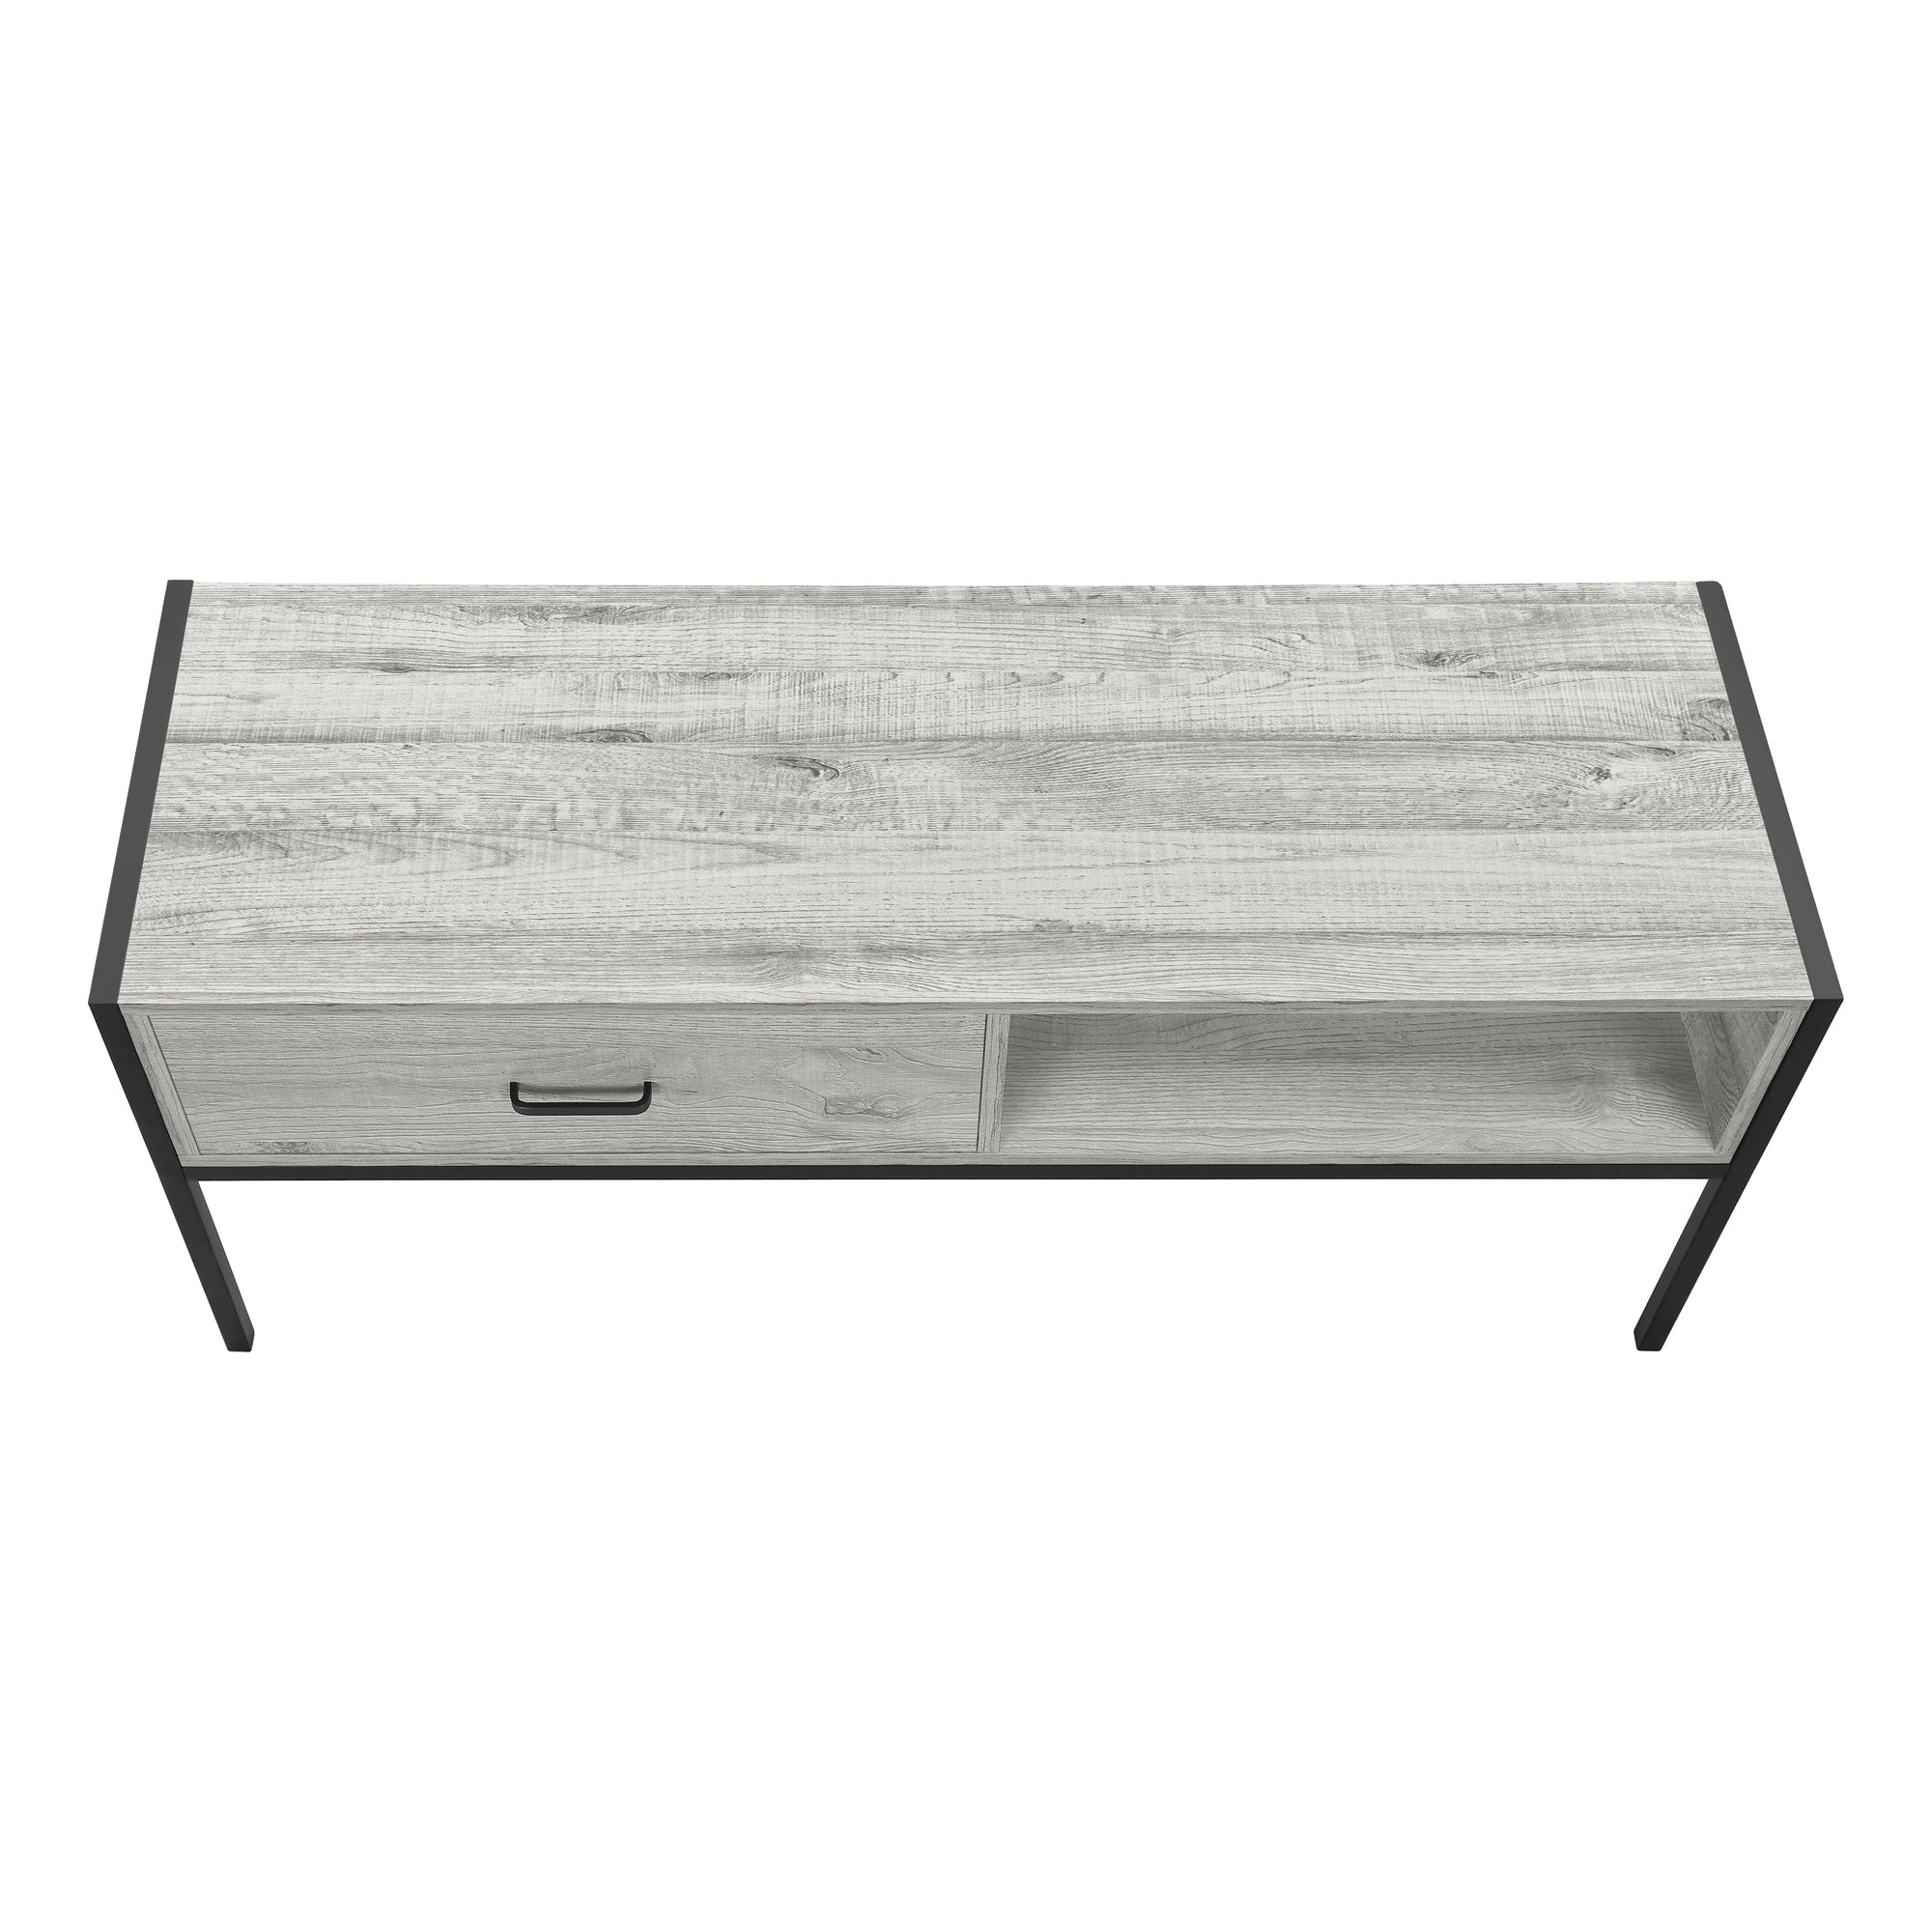 MN-712875    Tv Stand, 48 Inch, Console, Media Entertainment Center, Storage Cabinet, Living Room, Bedroom, Laminate, Metal, Grey, Contemporary, Modern